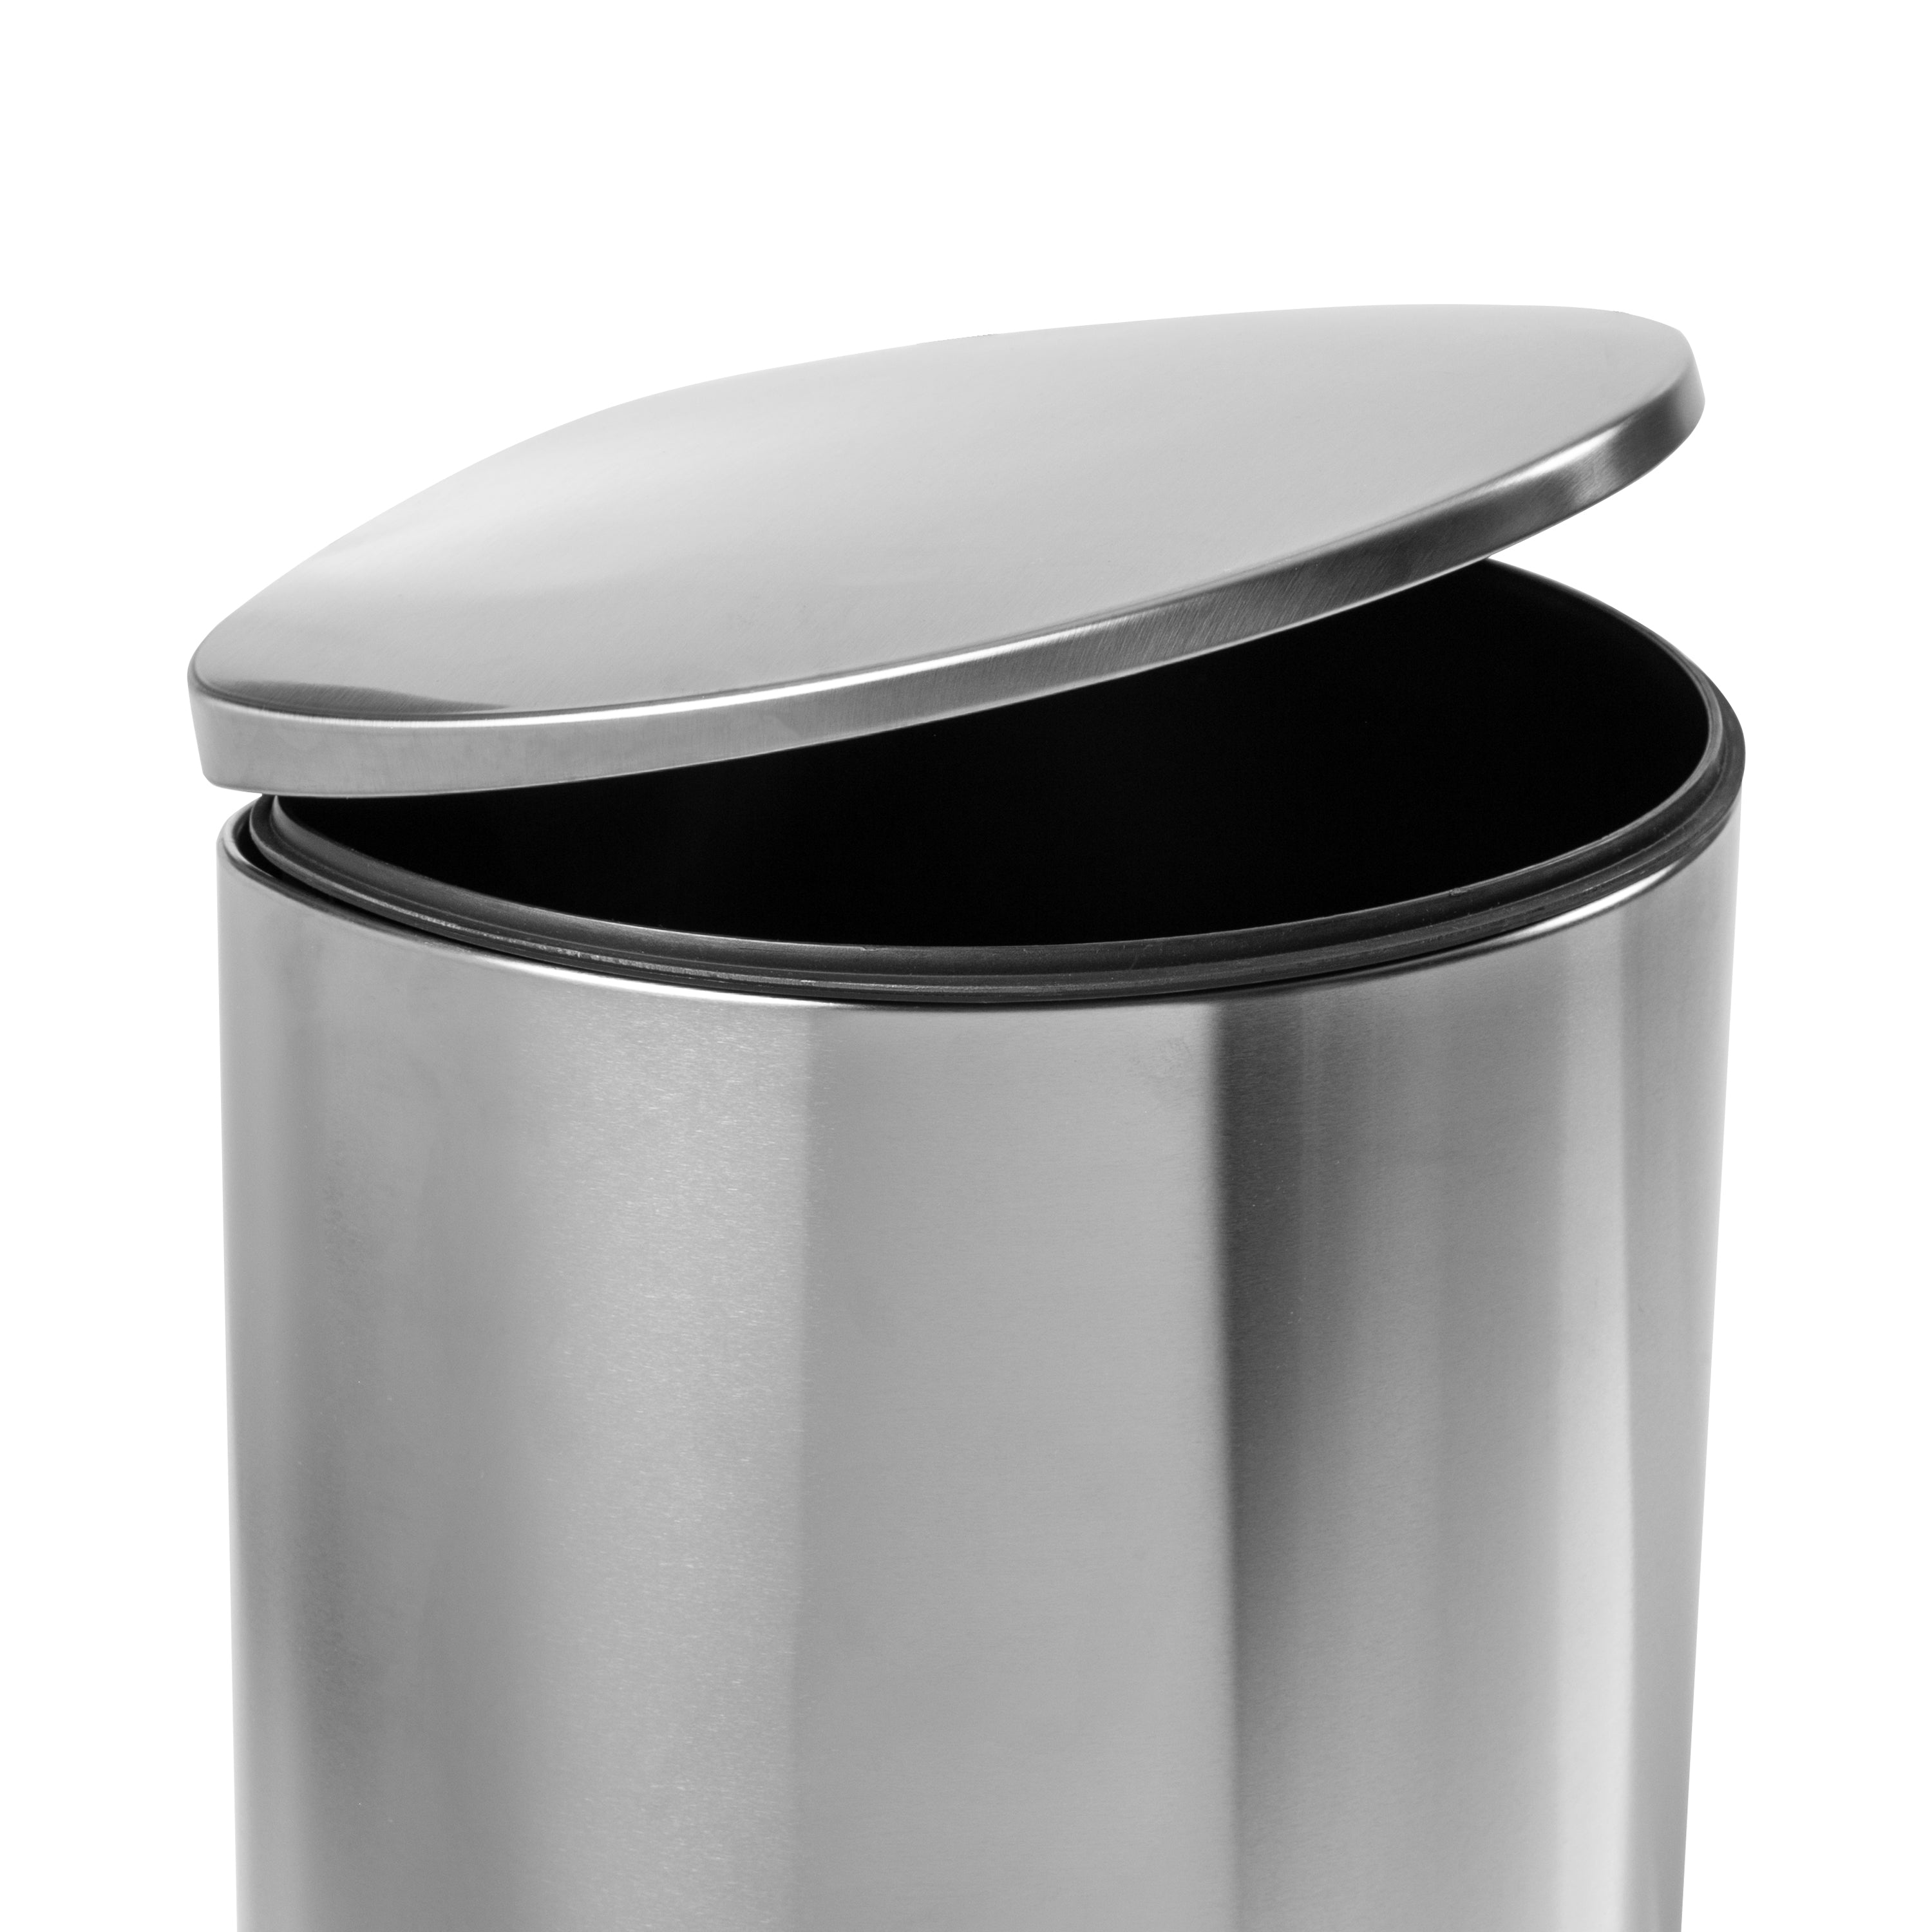 kans Zeker emulsie Semi-Round Stainless Steel Step Trash Can with Lid, 40-Liter